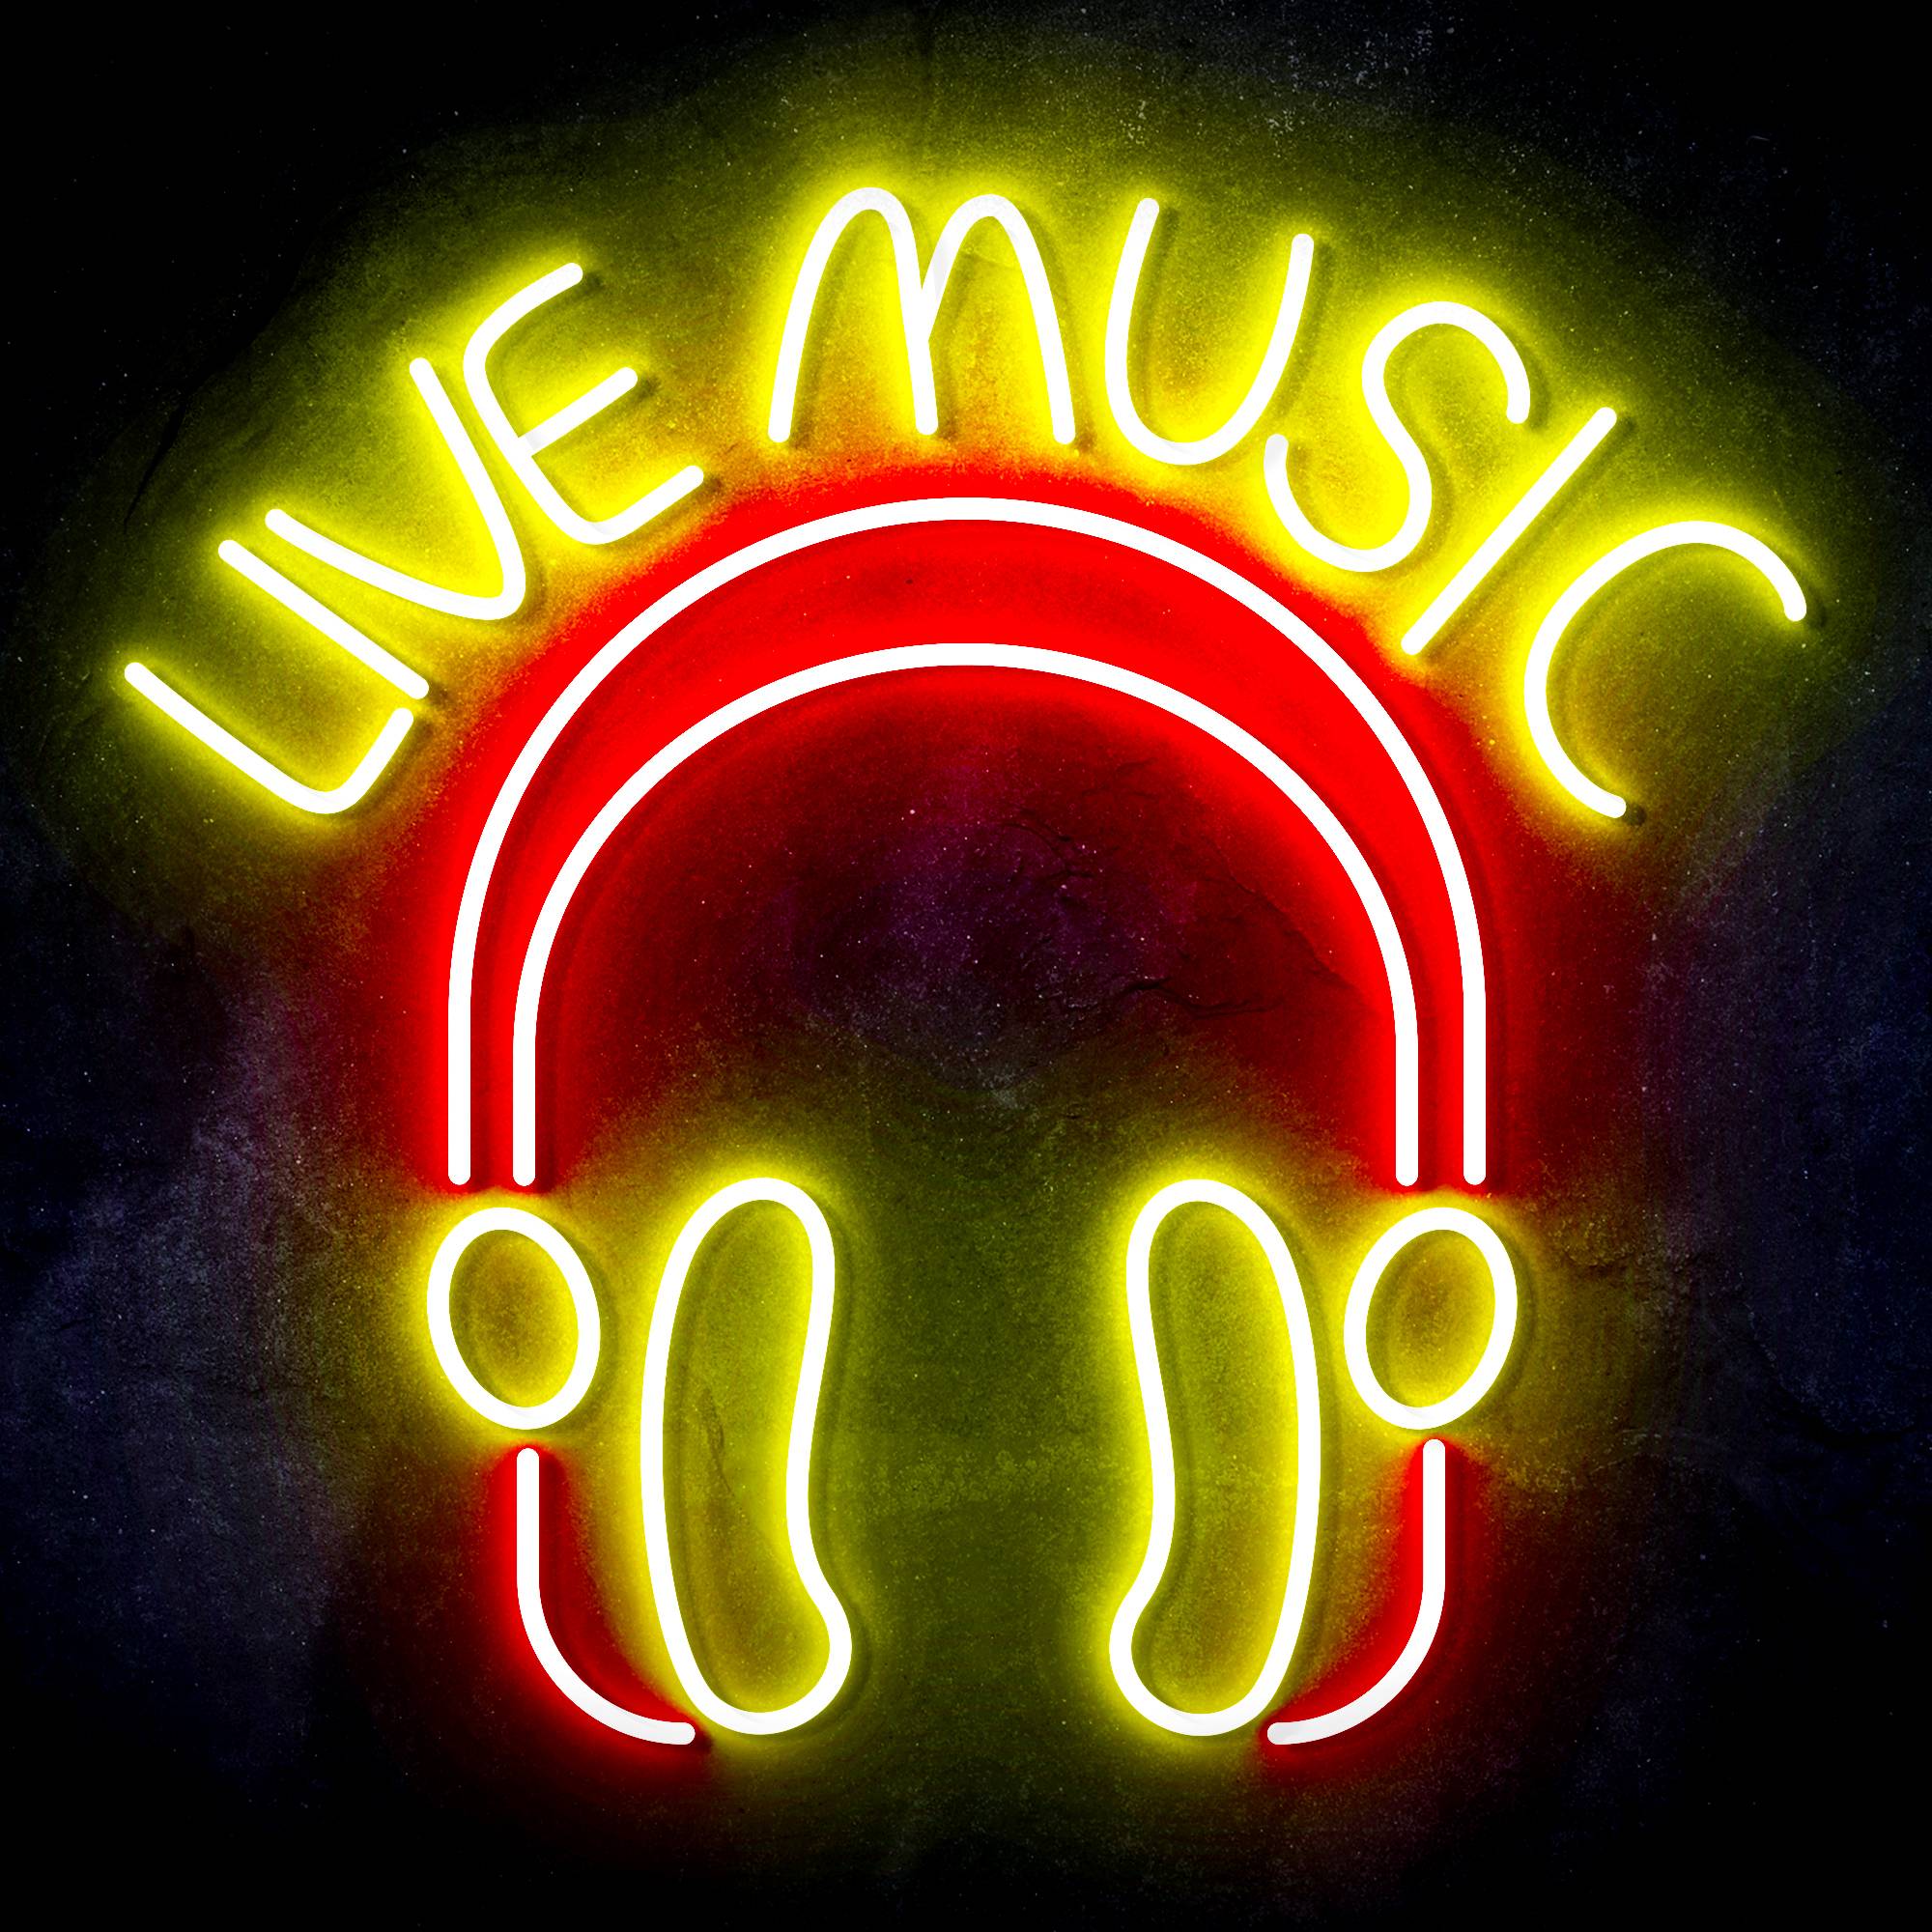 LIVE MUSIC with Earphone LED Neon Sign